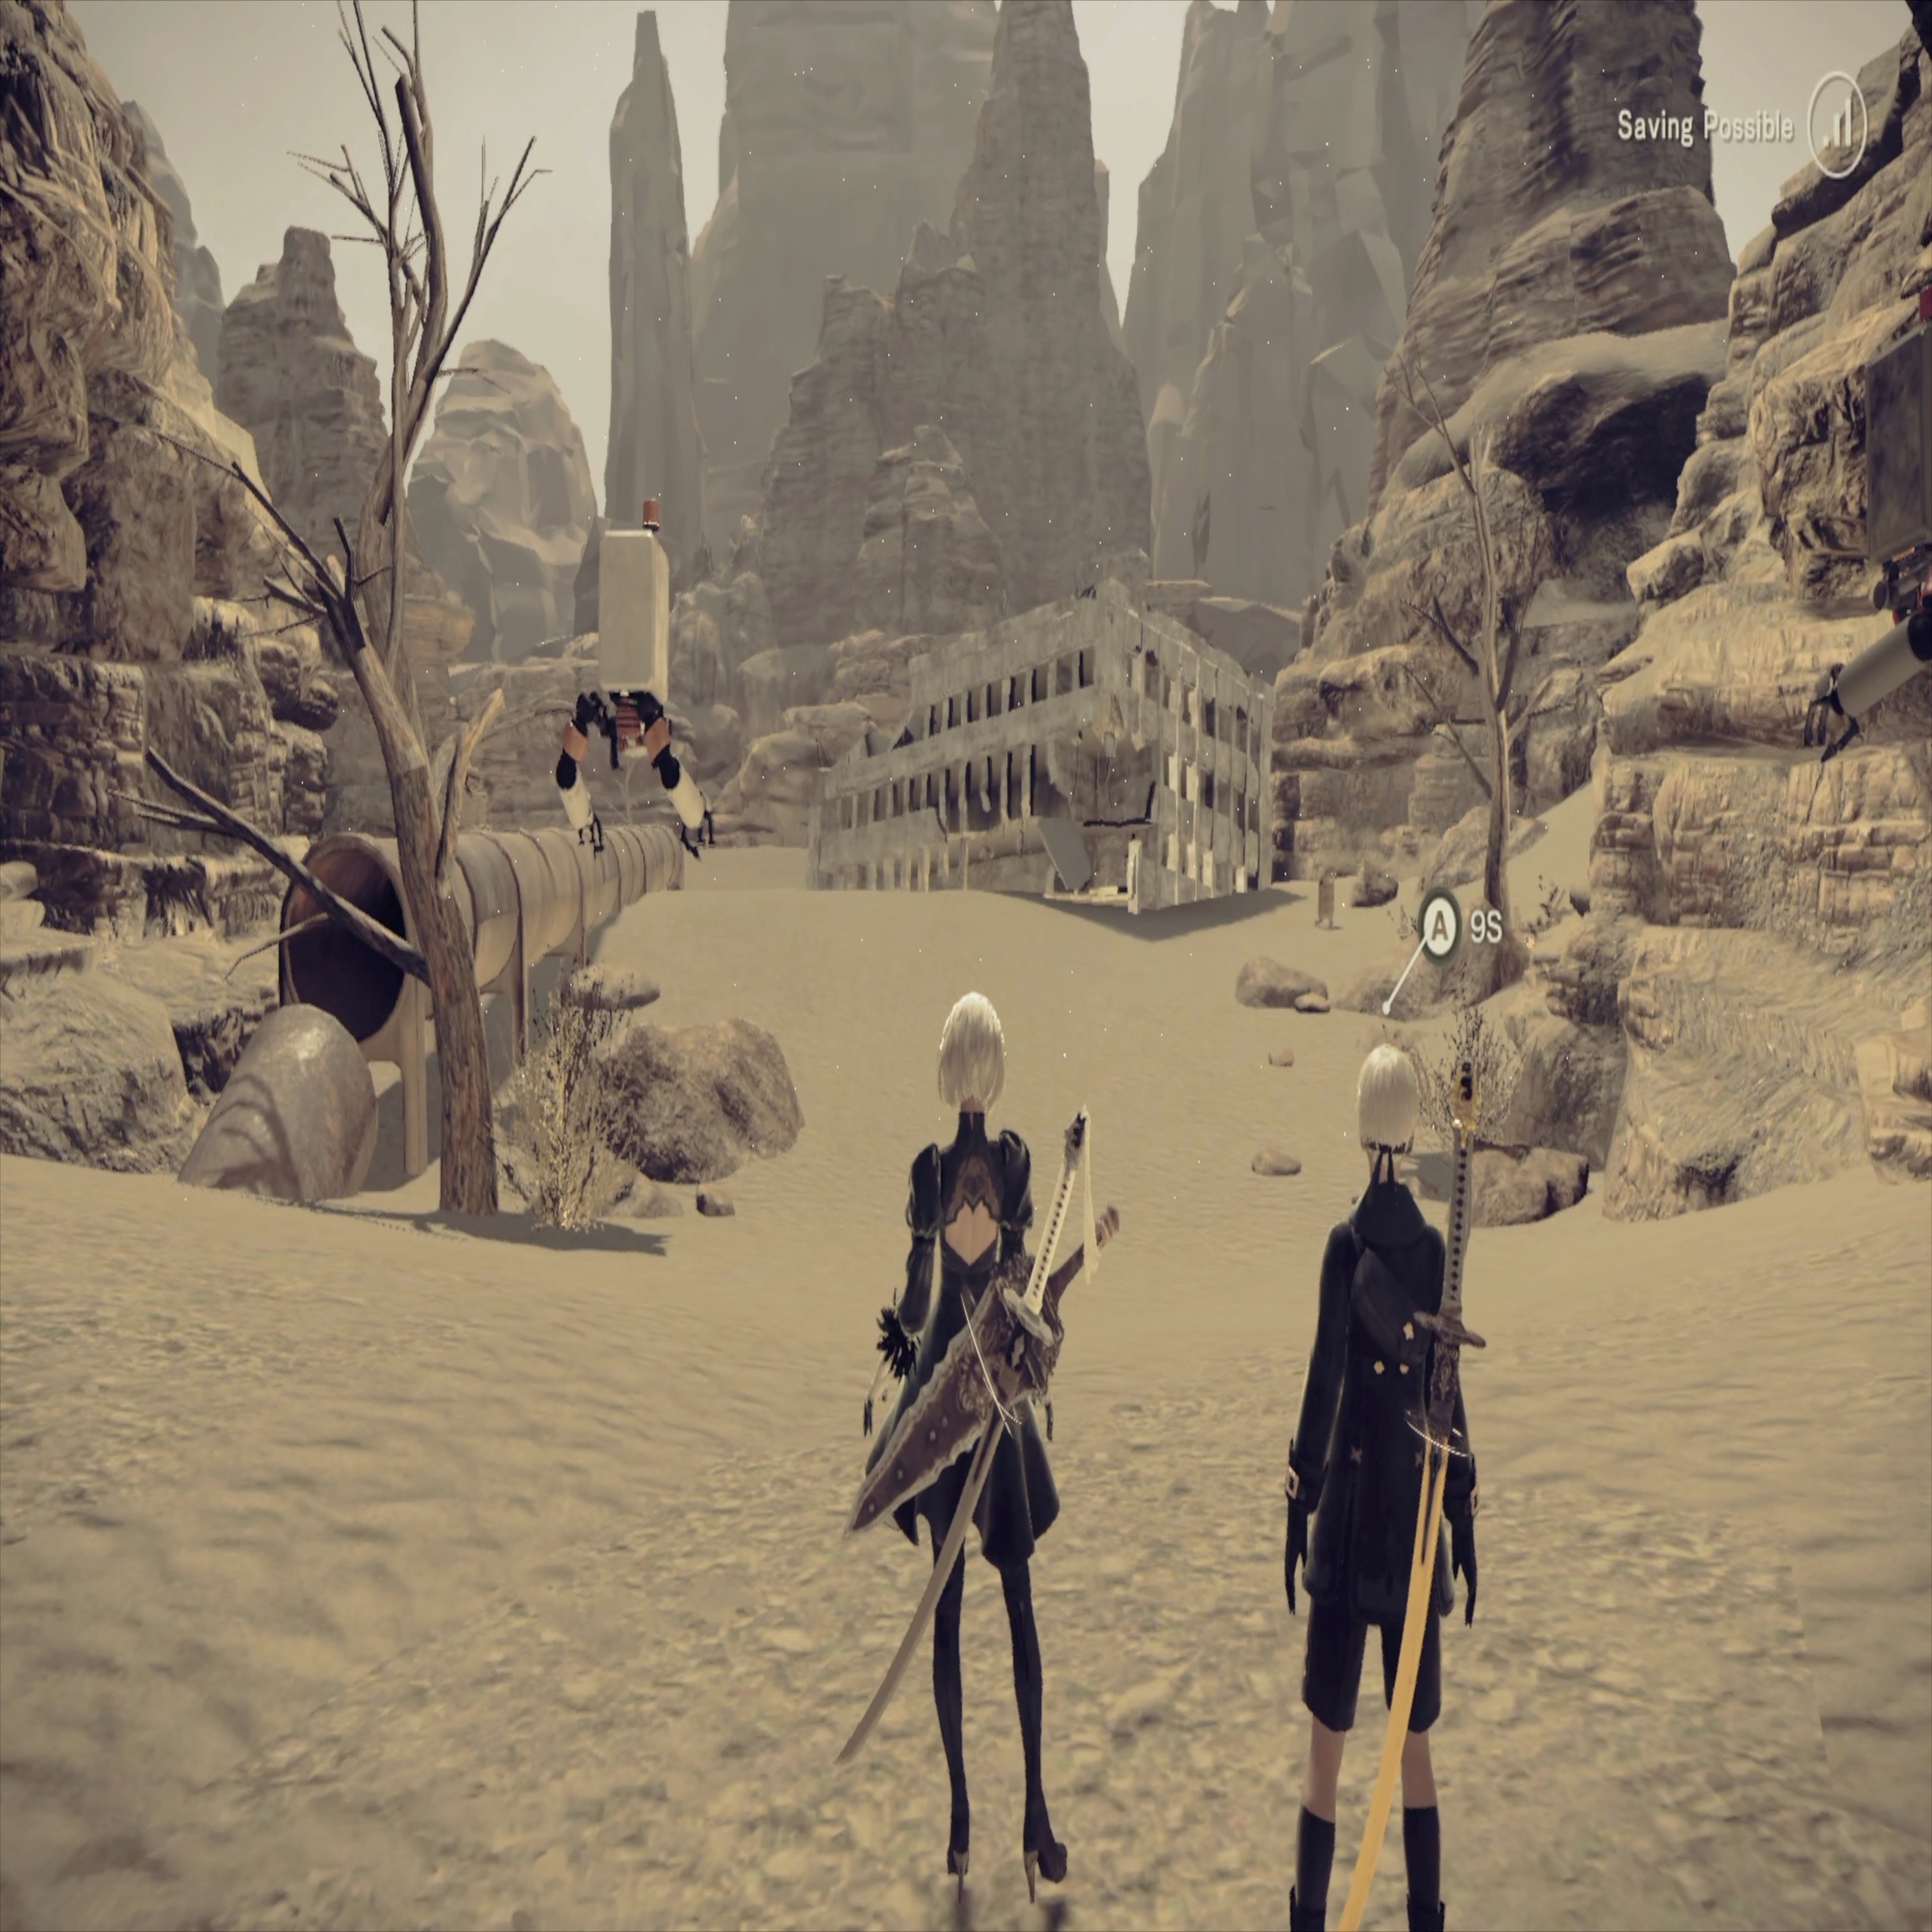 NieR: Automata Switch tech analysis, frame rate and resolution